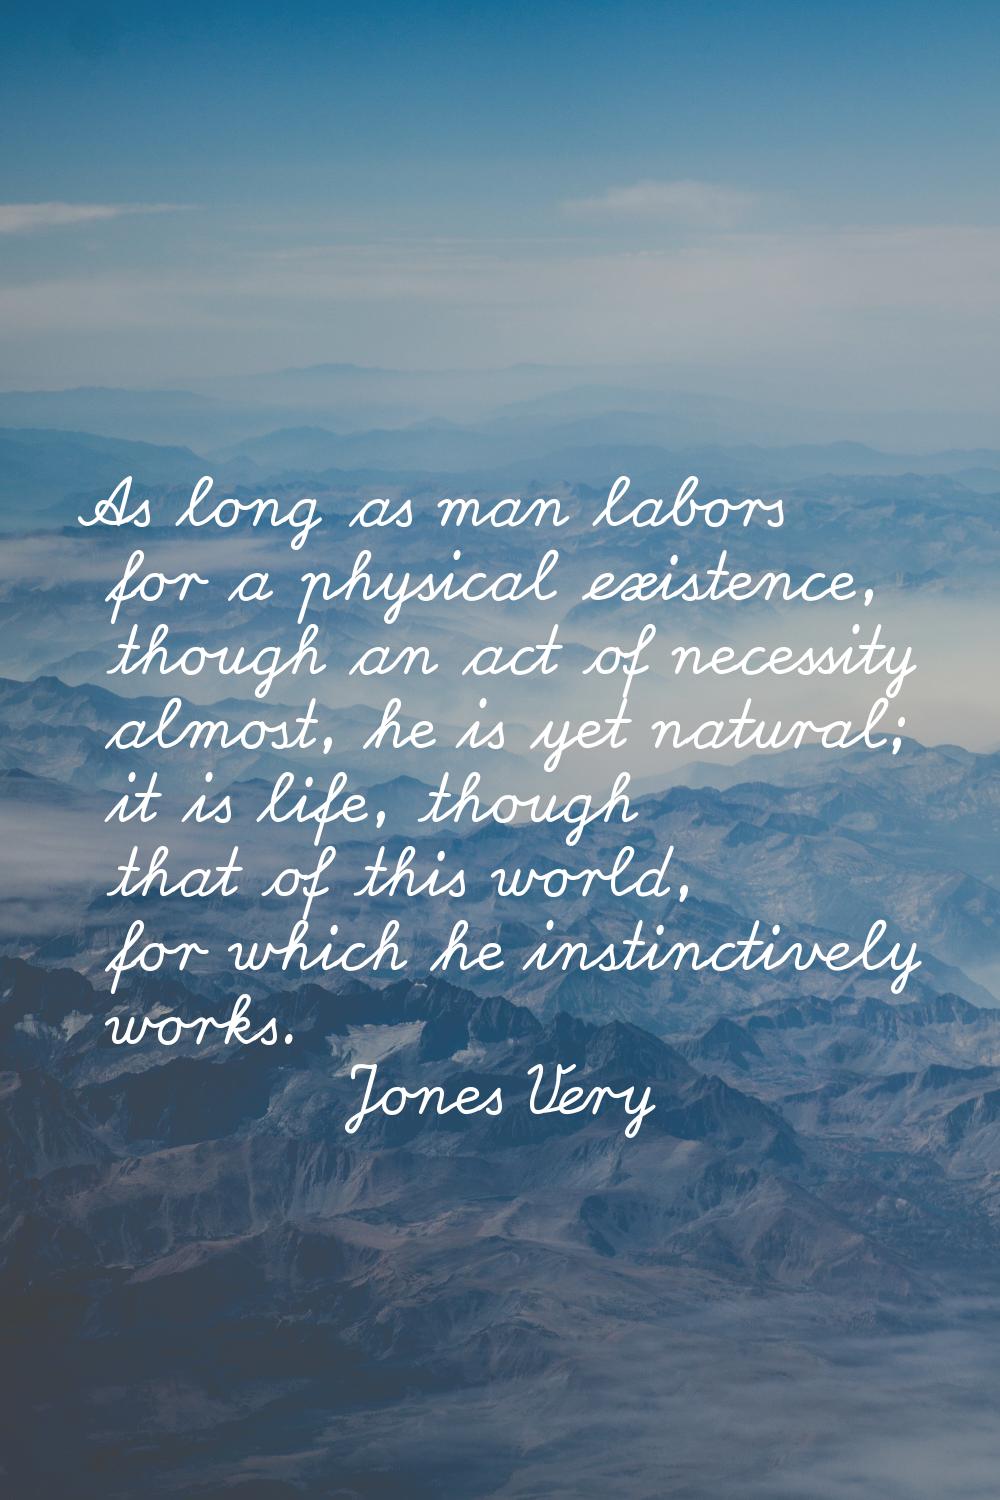 As long as man labors for a physical existence, though an act of necessity almost, he is yet natura